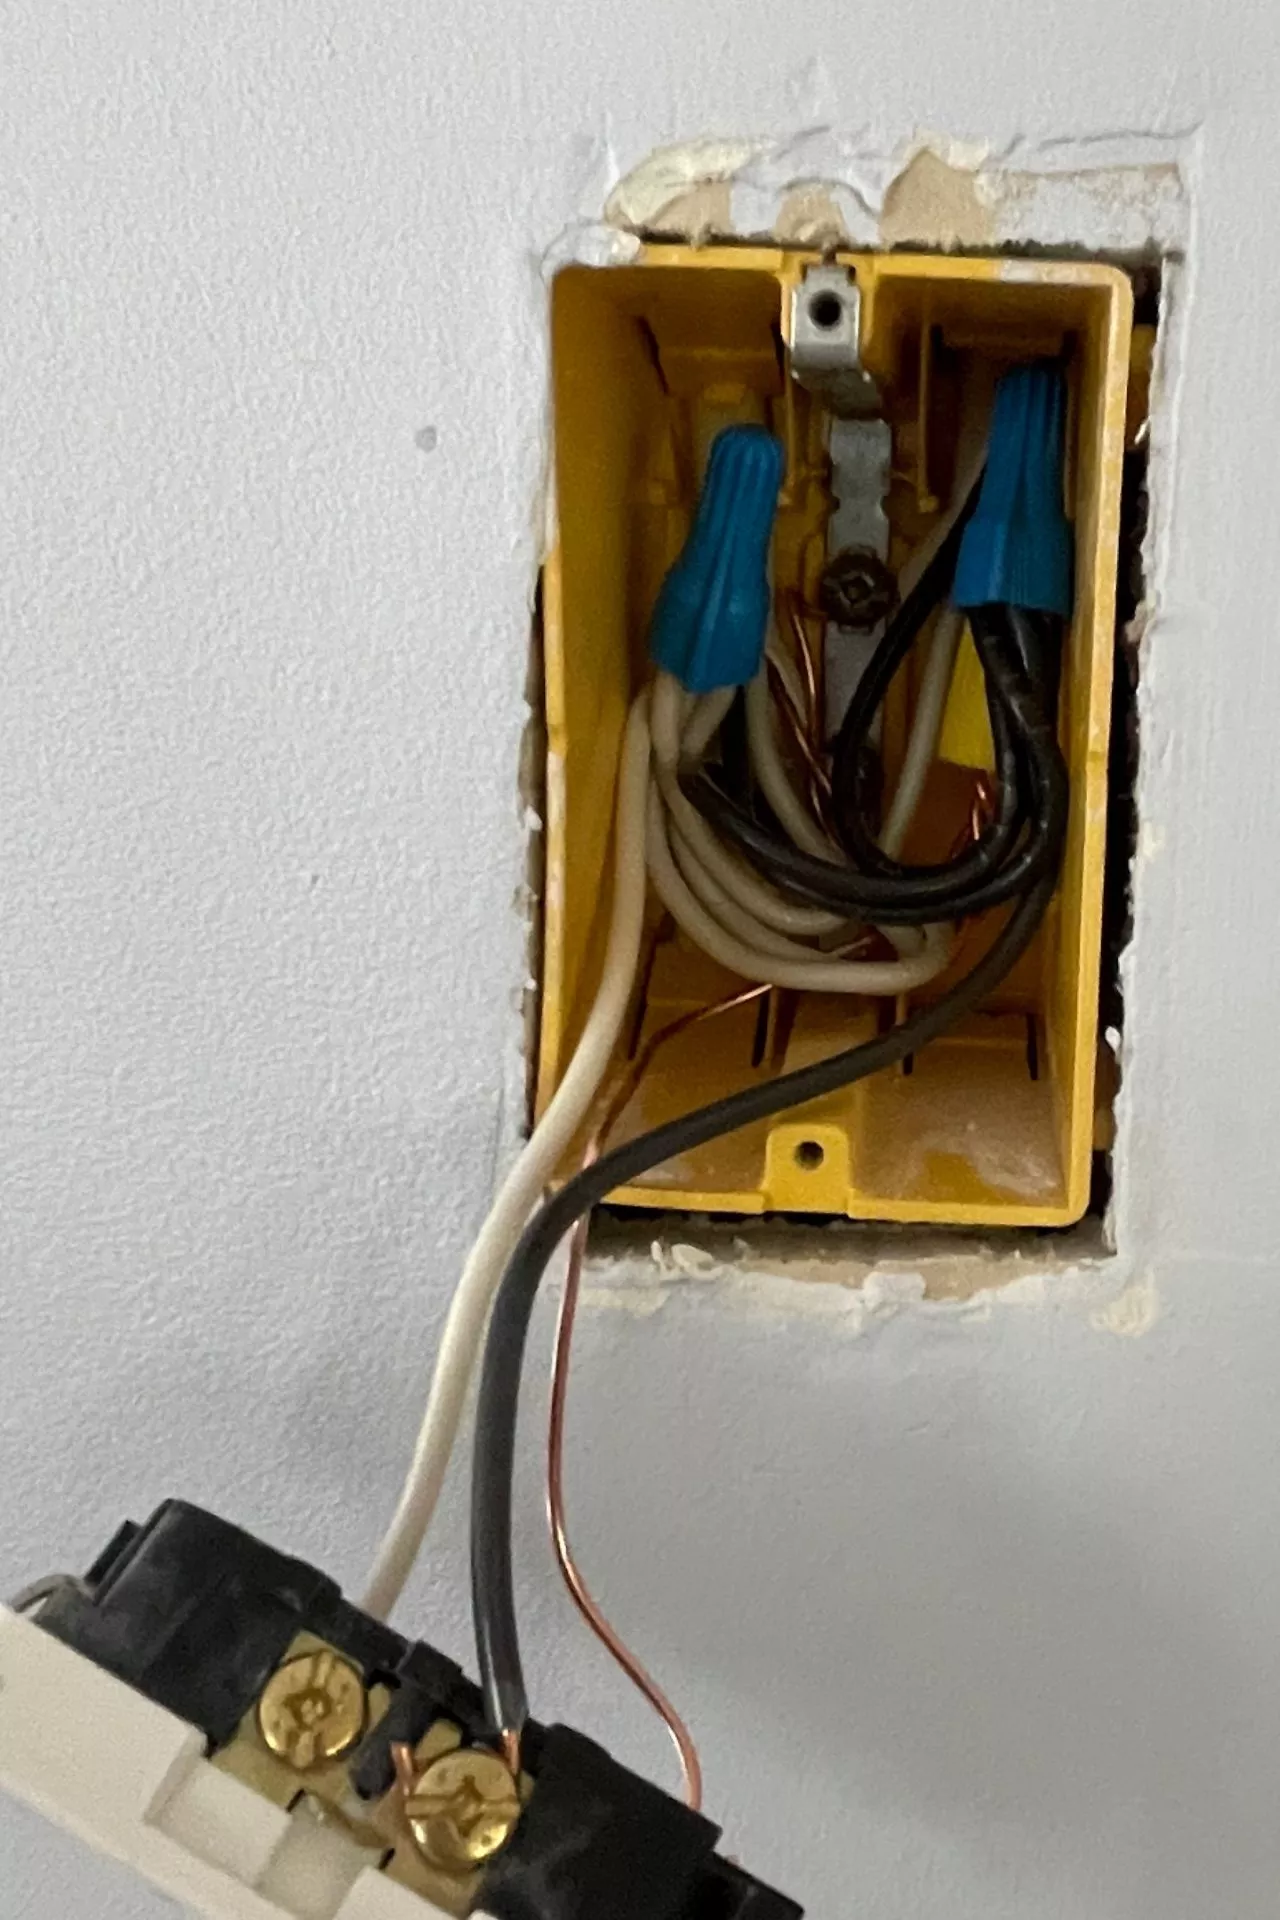 electrical outlet showing splices with the cover removed